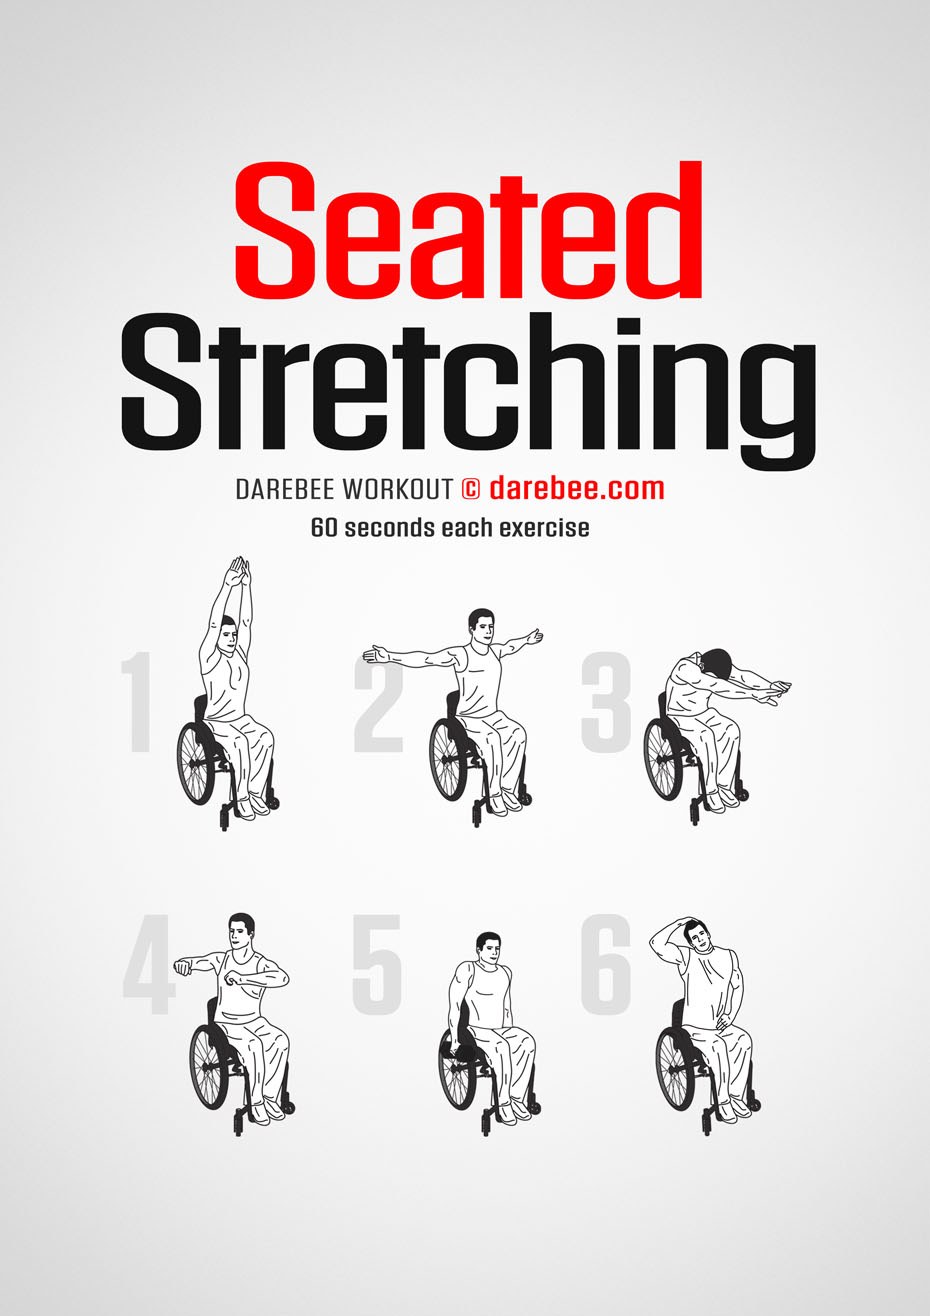 Seated Stretching Workout